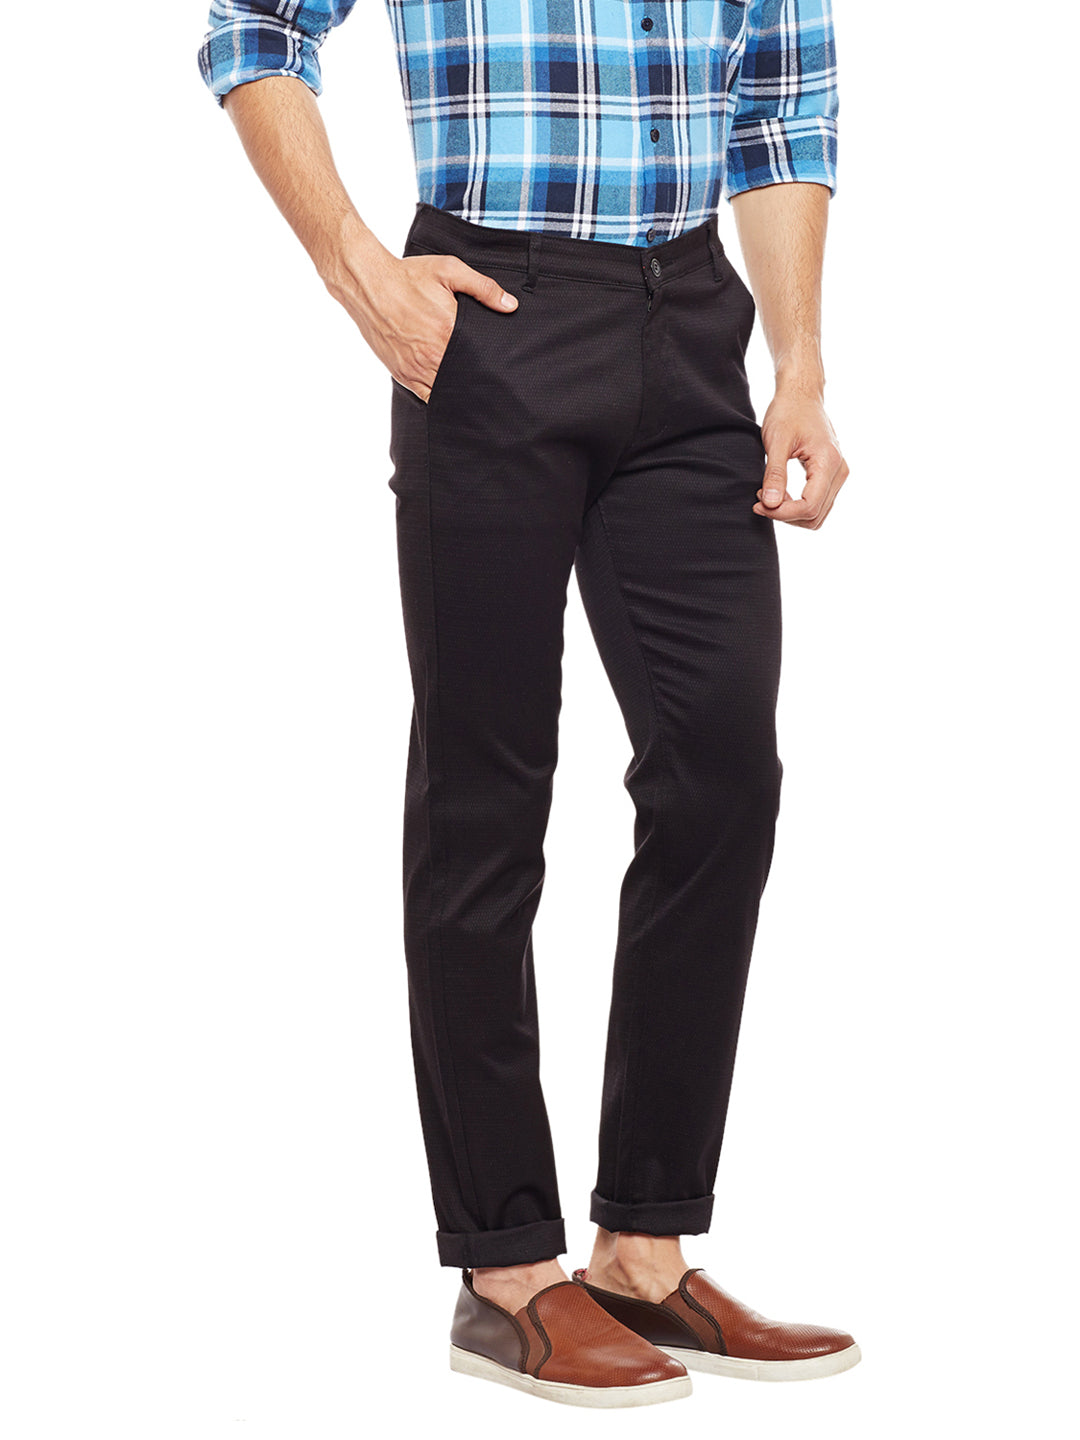 Men Black Solid  Cotton Stretch Slim Fit Casual Chinos Trouser